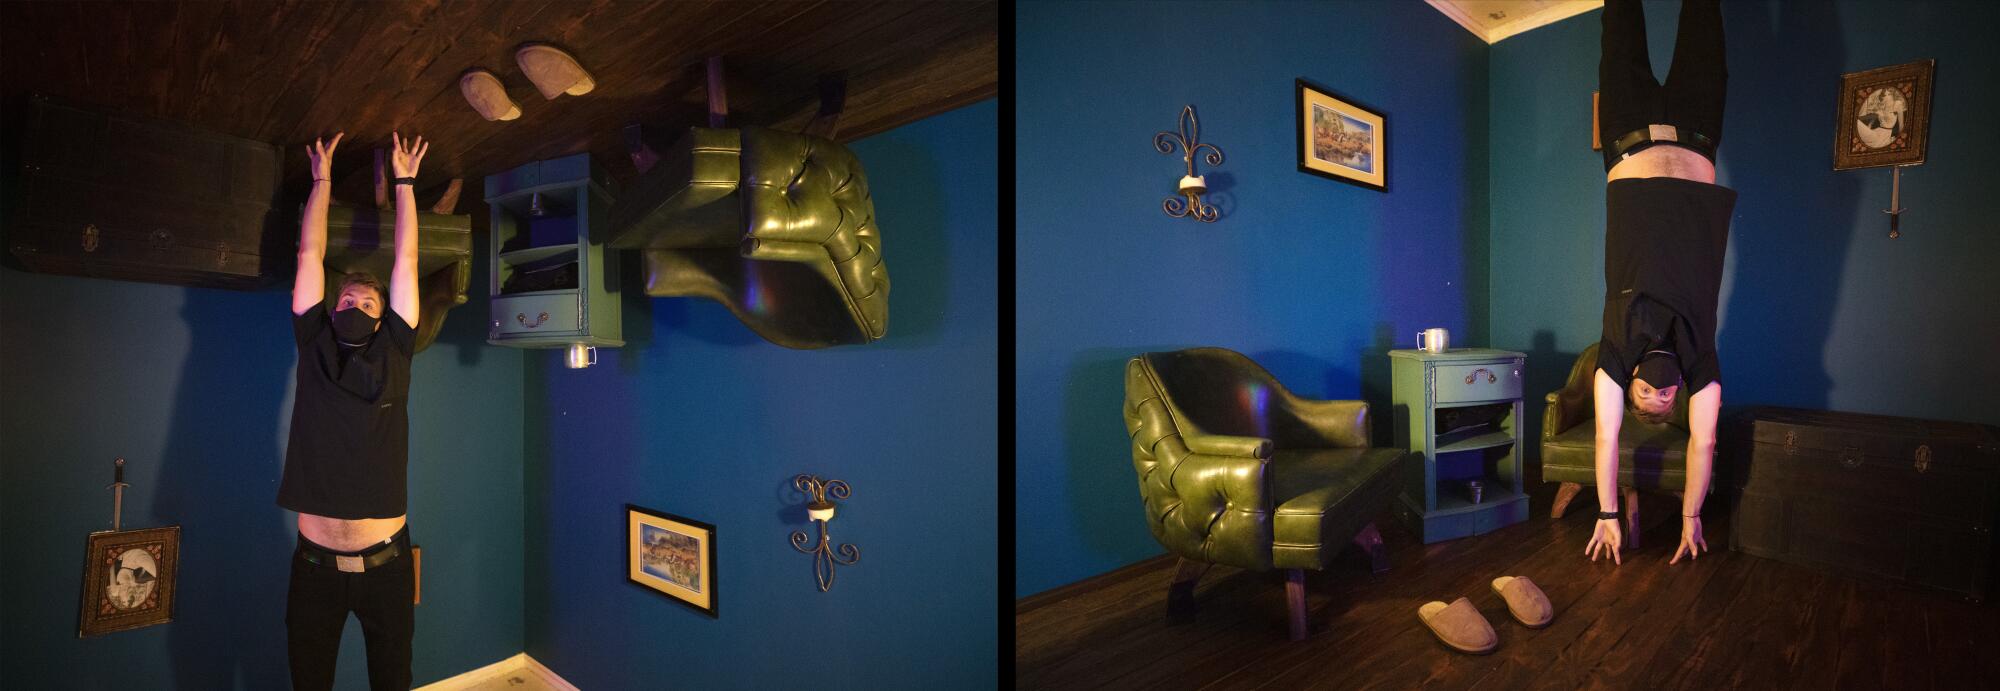 A split image of a man standing and touching the ceiling in a blue room and the same man appearing to hang upside down 